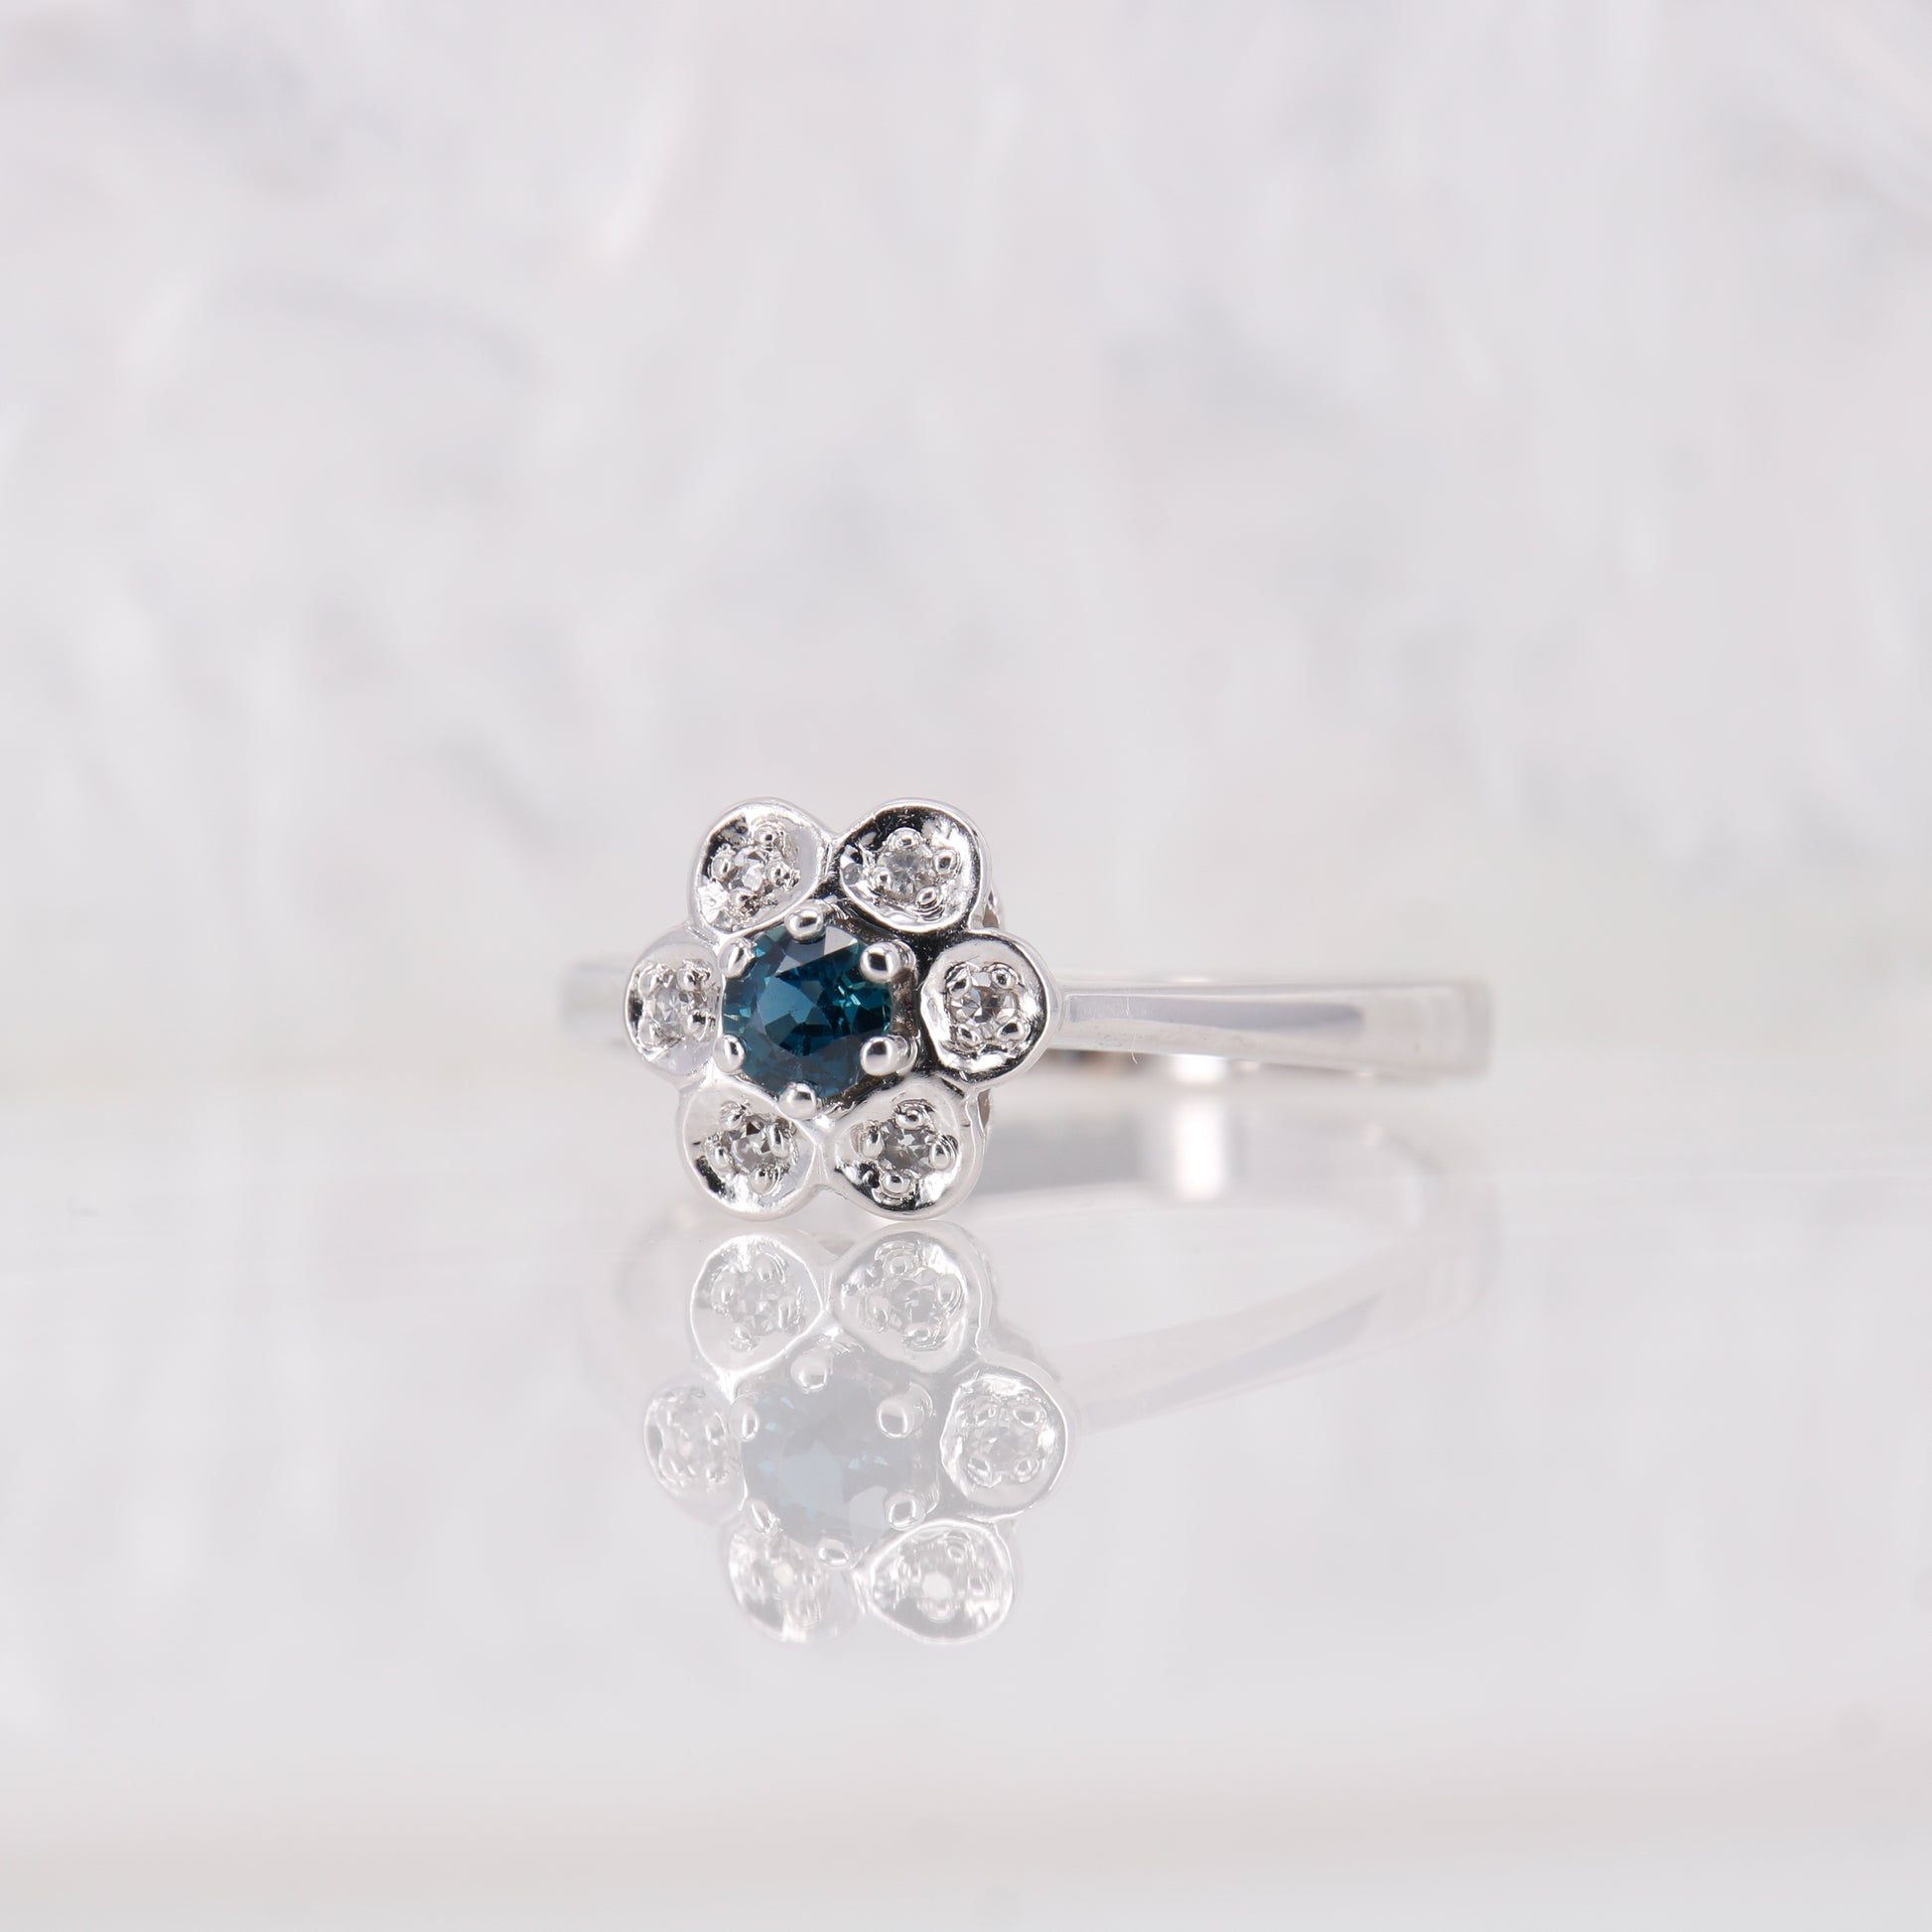 Antique 18ct White Gold Sapphire & Diamond Gold Ring, Vintage Flower Sapphire and Diamond Engagement Ring.